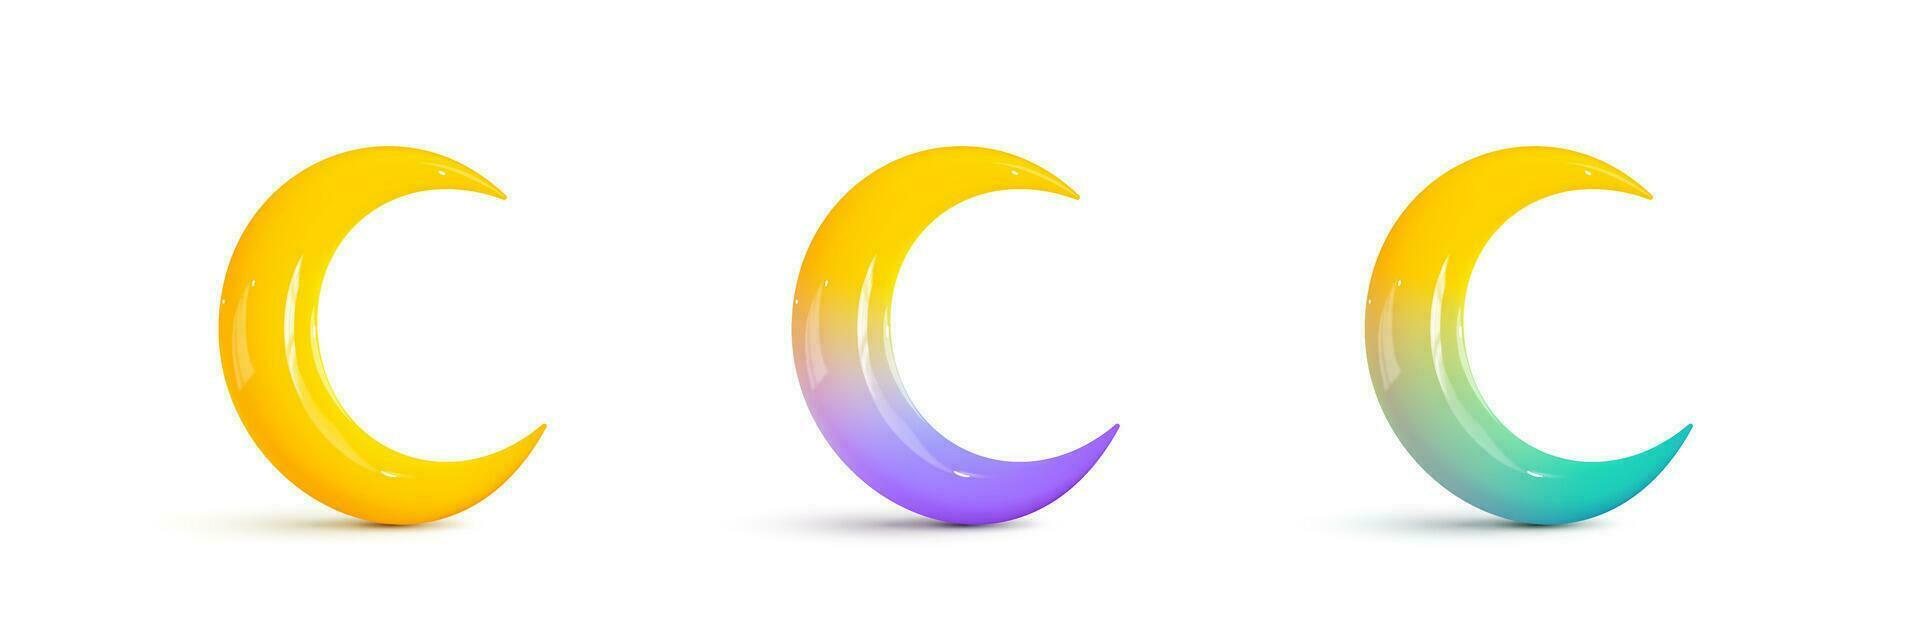 Set of glossy yellow 3d crescents realistic style rendering. Yellow with multicolor gradient plastic icon moons isolated on white background. Vector illustration